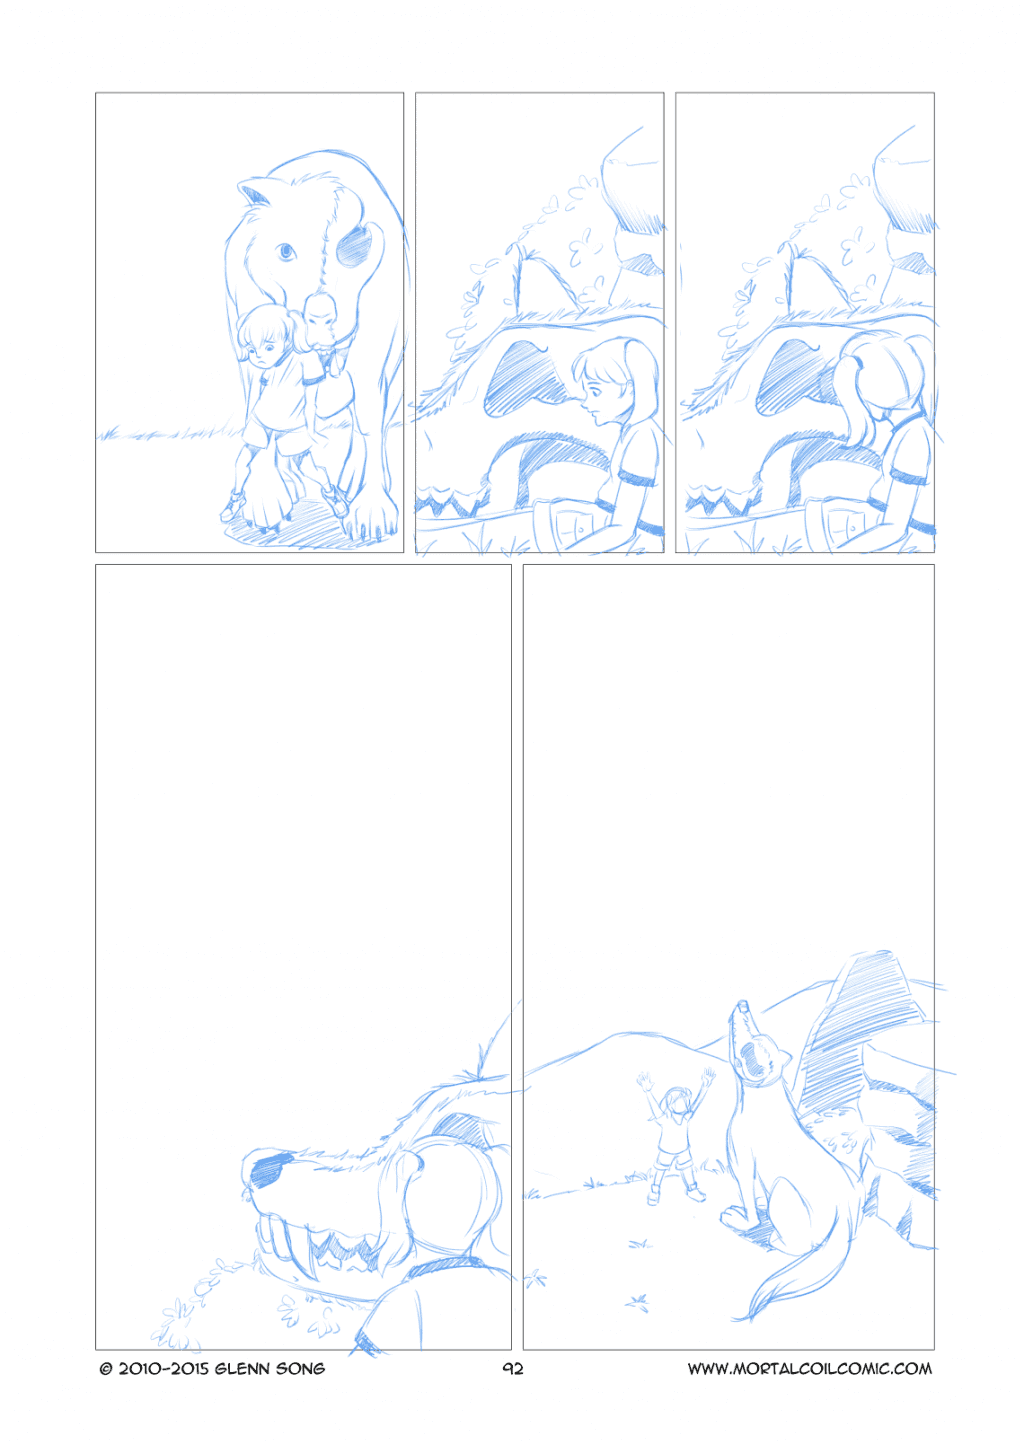 A Wolf's Cry - 2 - Pencils